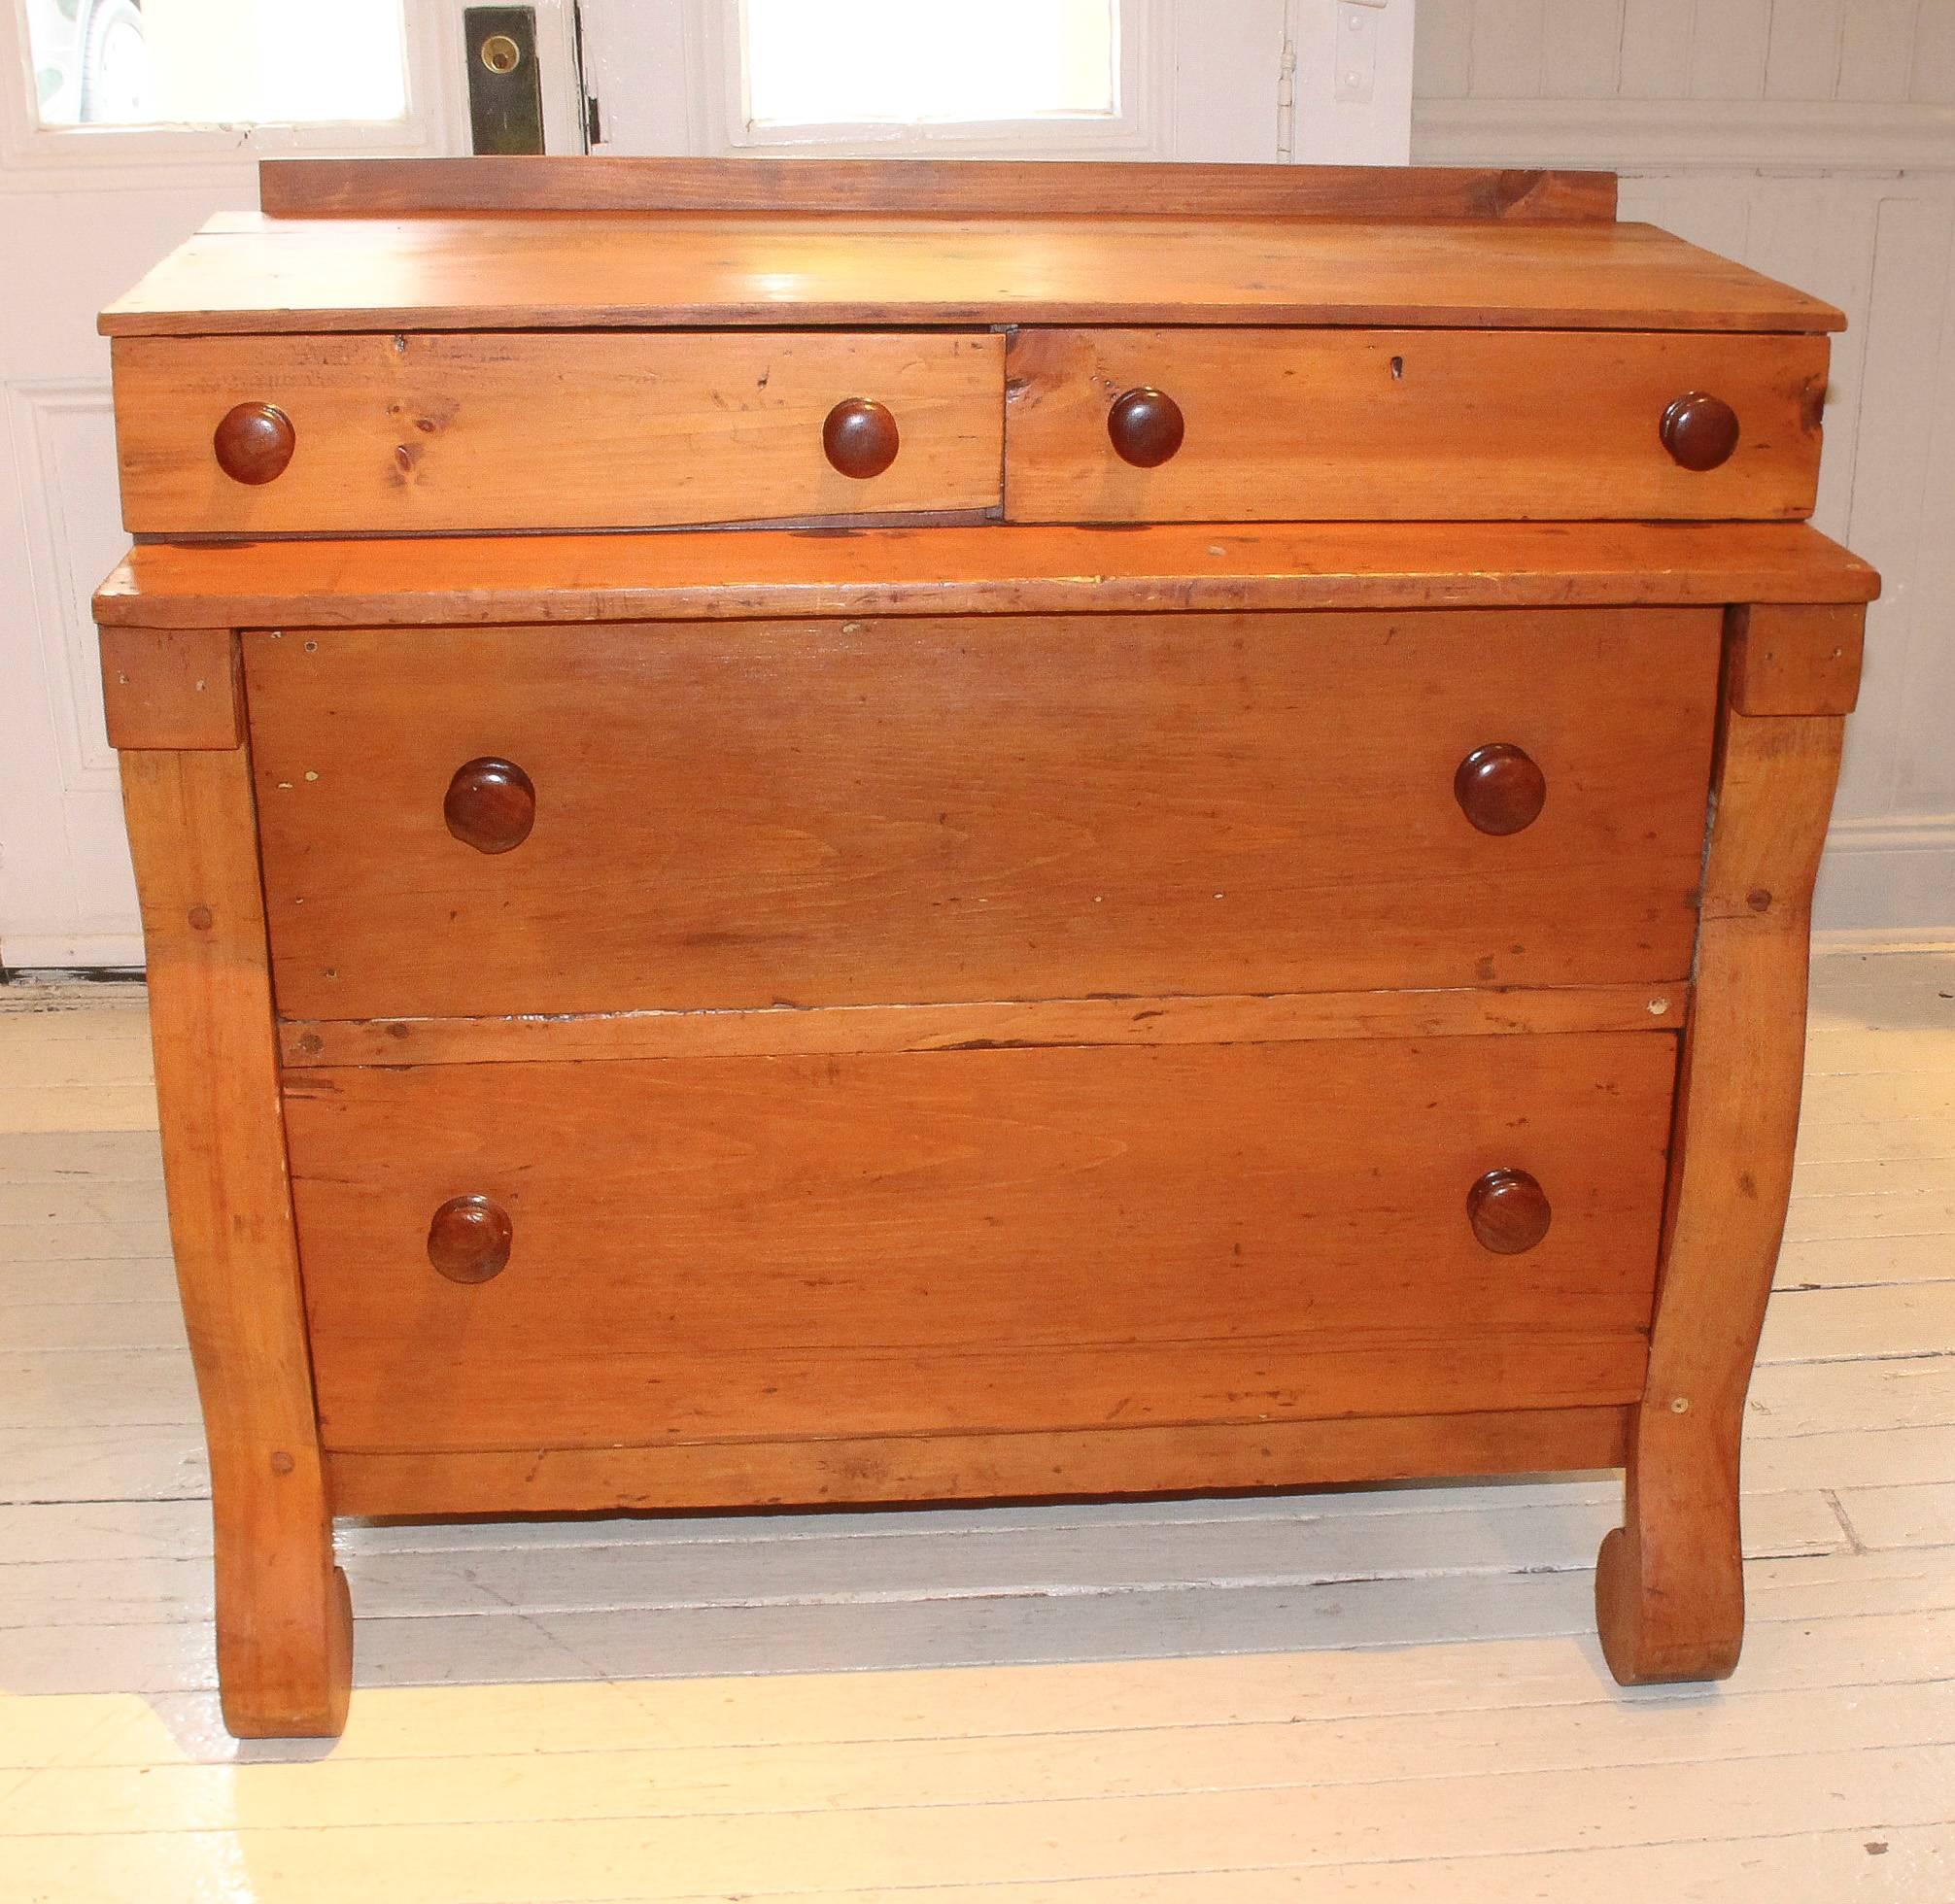 Benchmade vintage pine chest, 1960s, American, with two recessed drawers atop double drawers, all with wood knobs. Bottom drawers are edged with curvaceous side moulding culminating in scroll feet.